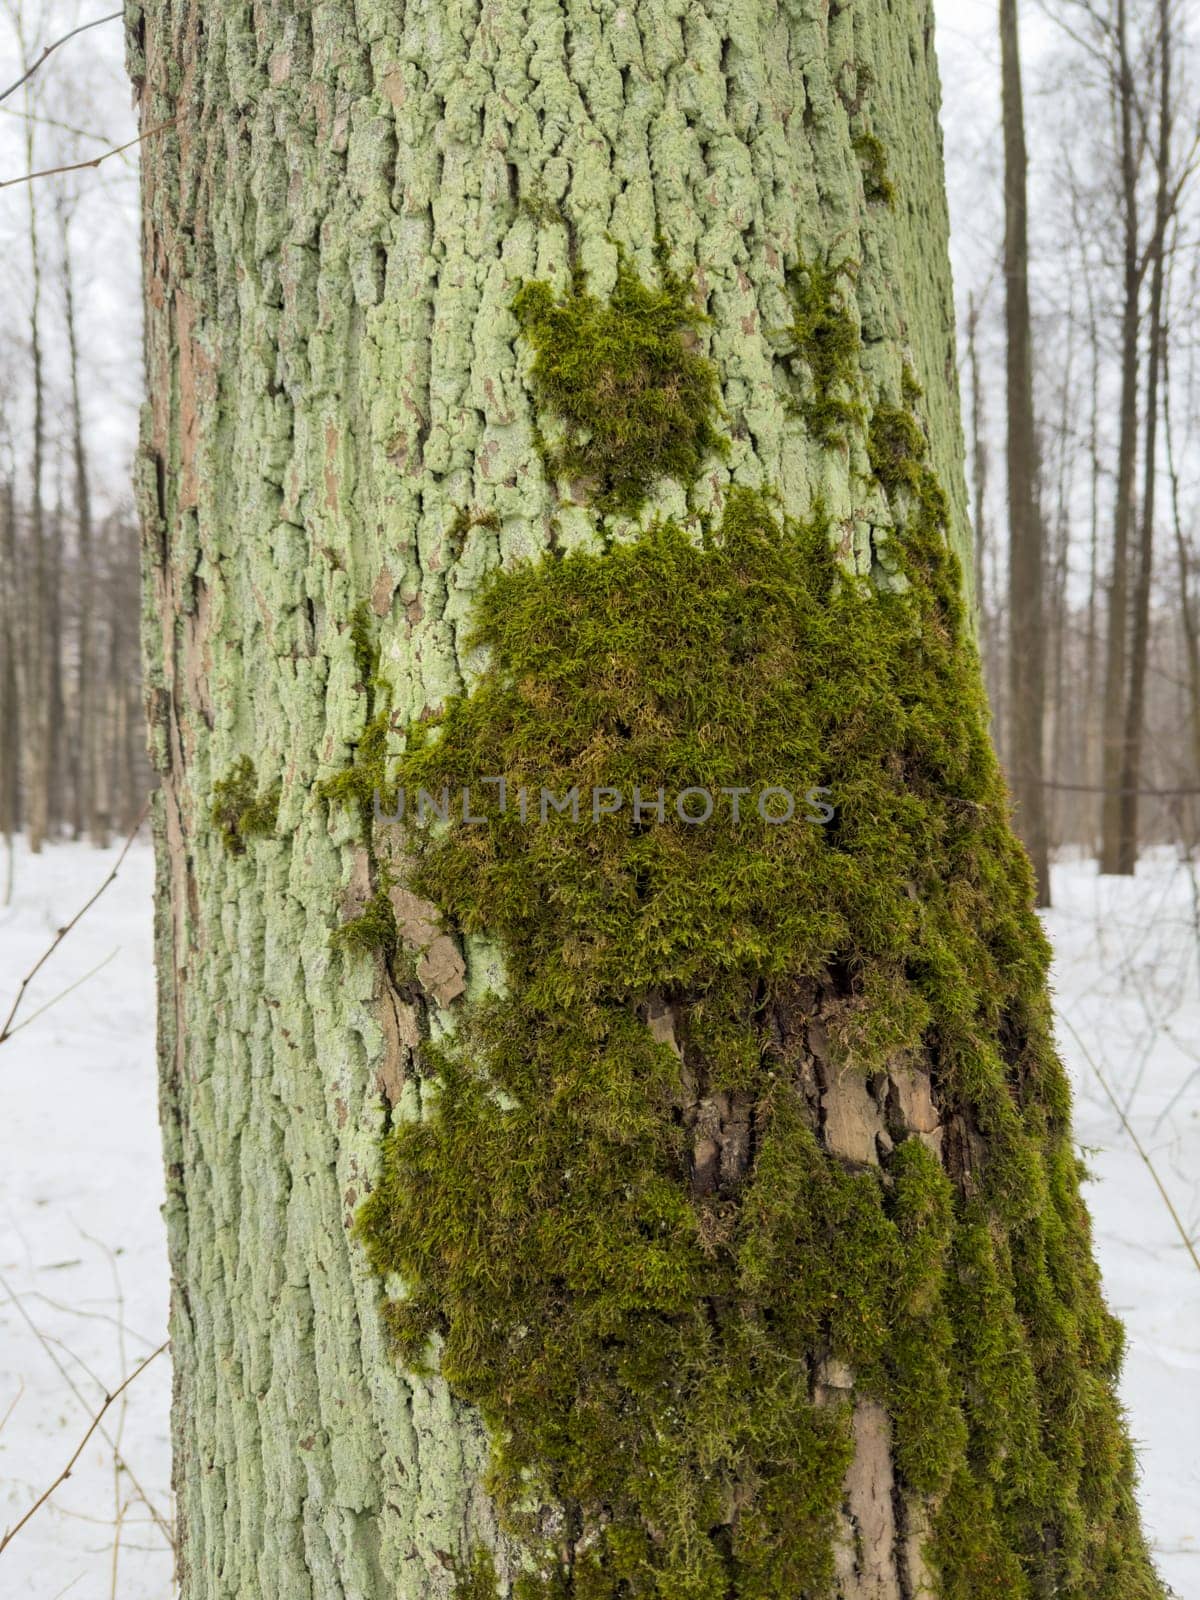 a close view of green moss on a tree trunk in a wild park. High quality photo